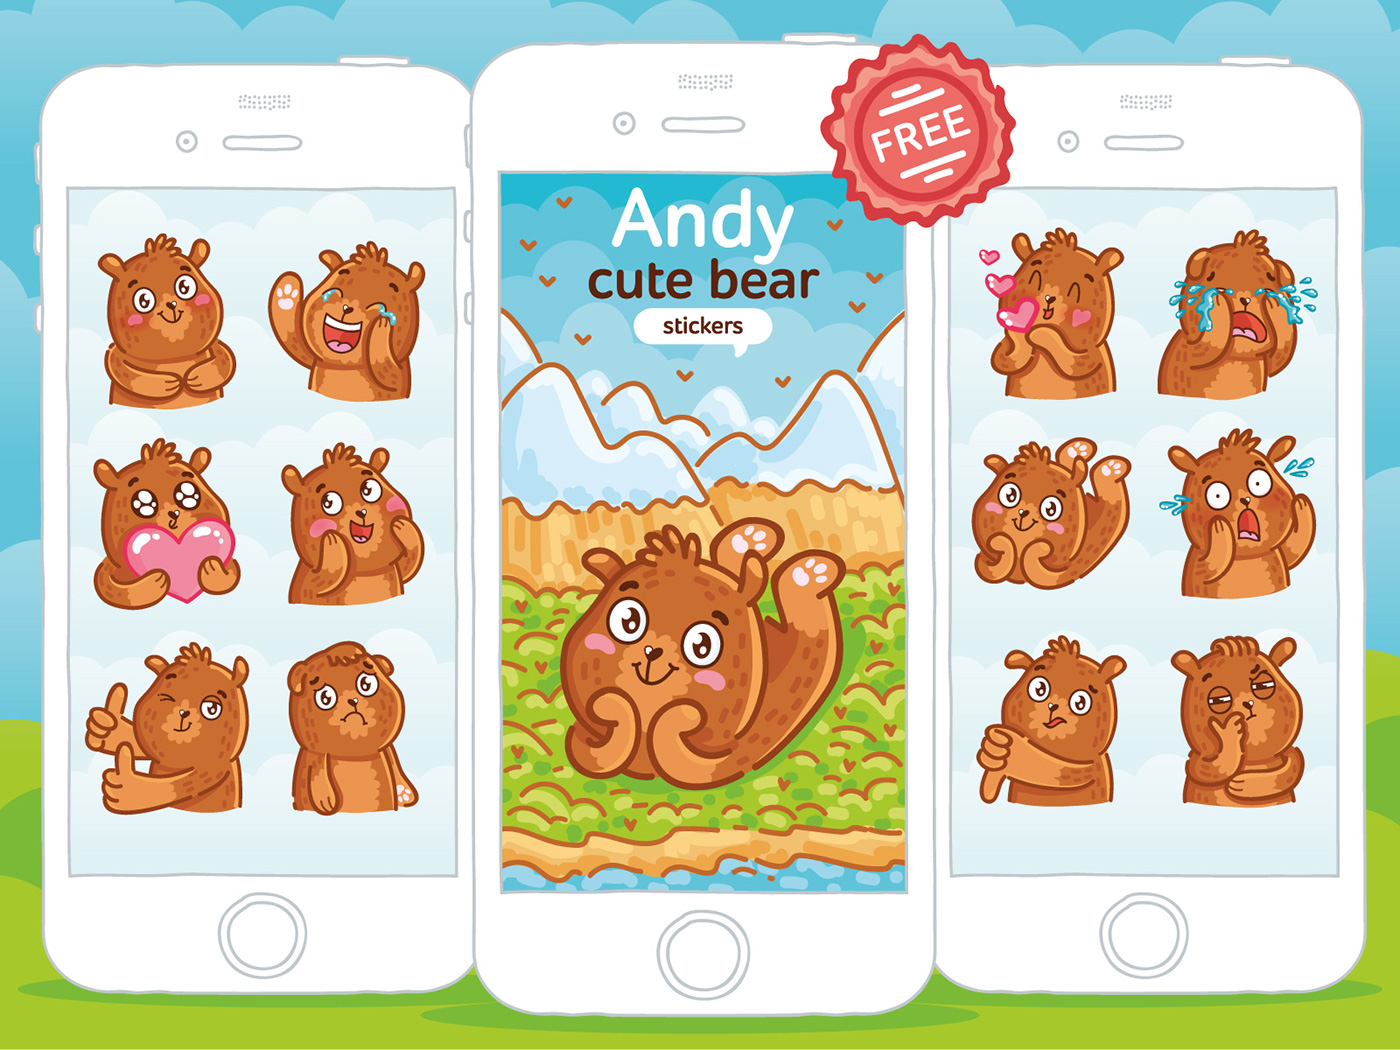 stickers imessage cute bear Character animal Character design  free iphone ios